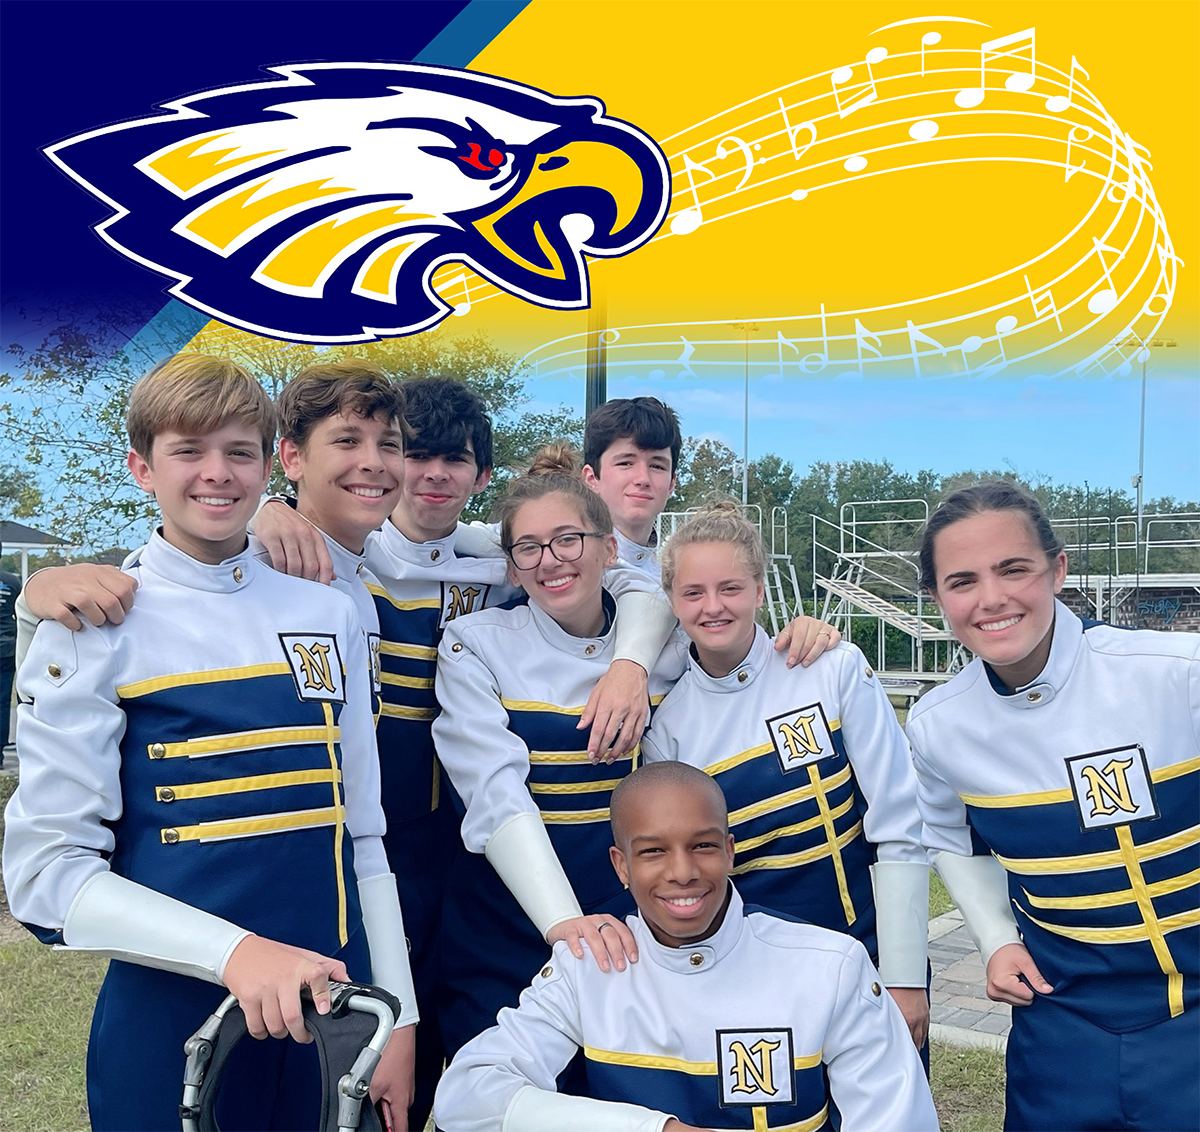 Naples High School Band features a smallgroup of students in full marching uniform